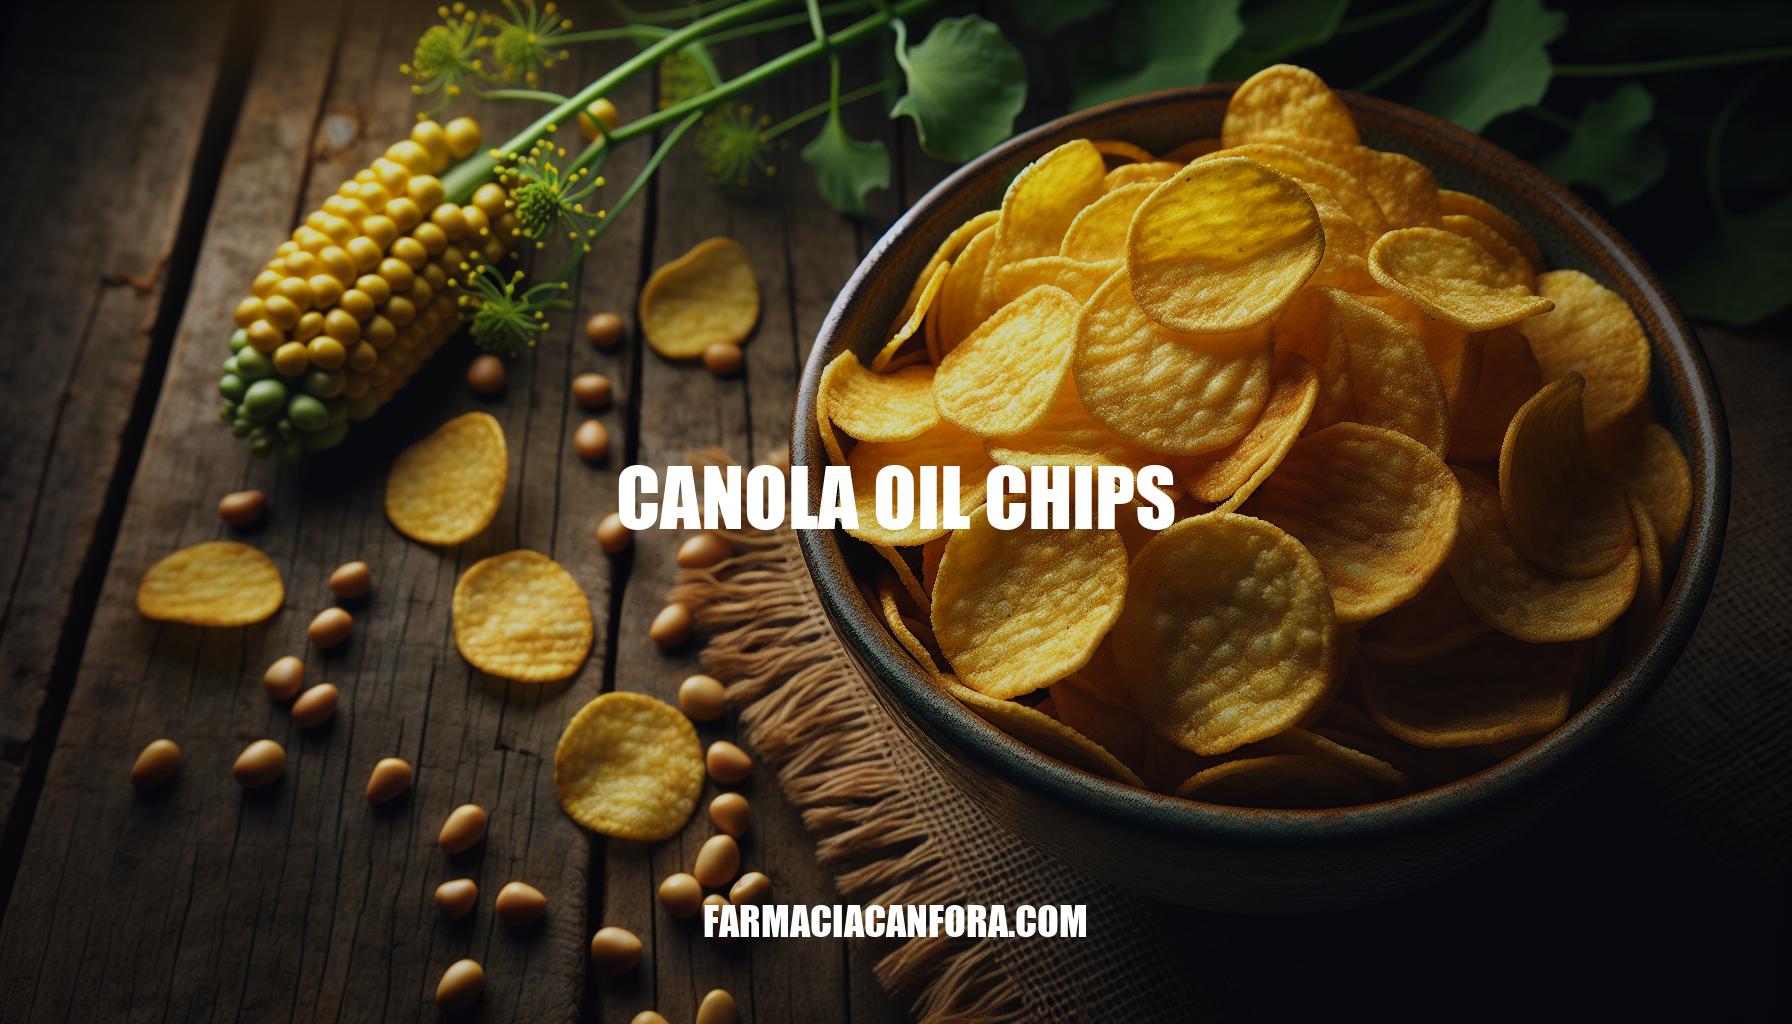 Canola Oil Chips: The Crunchy, Healthy Snack Alternative